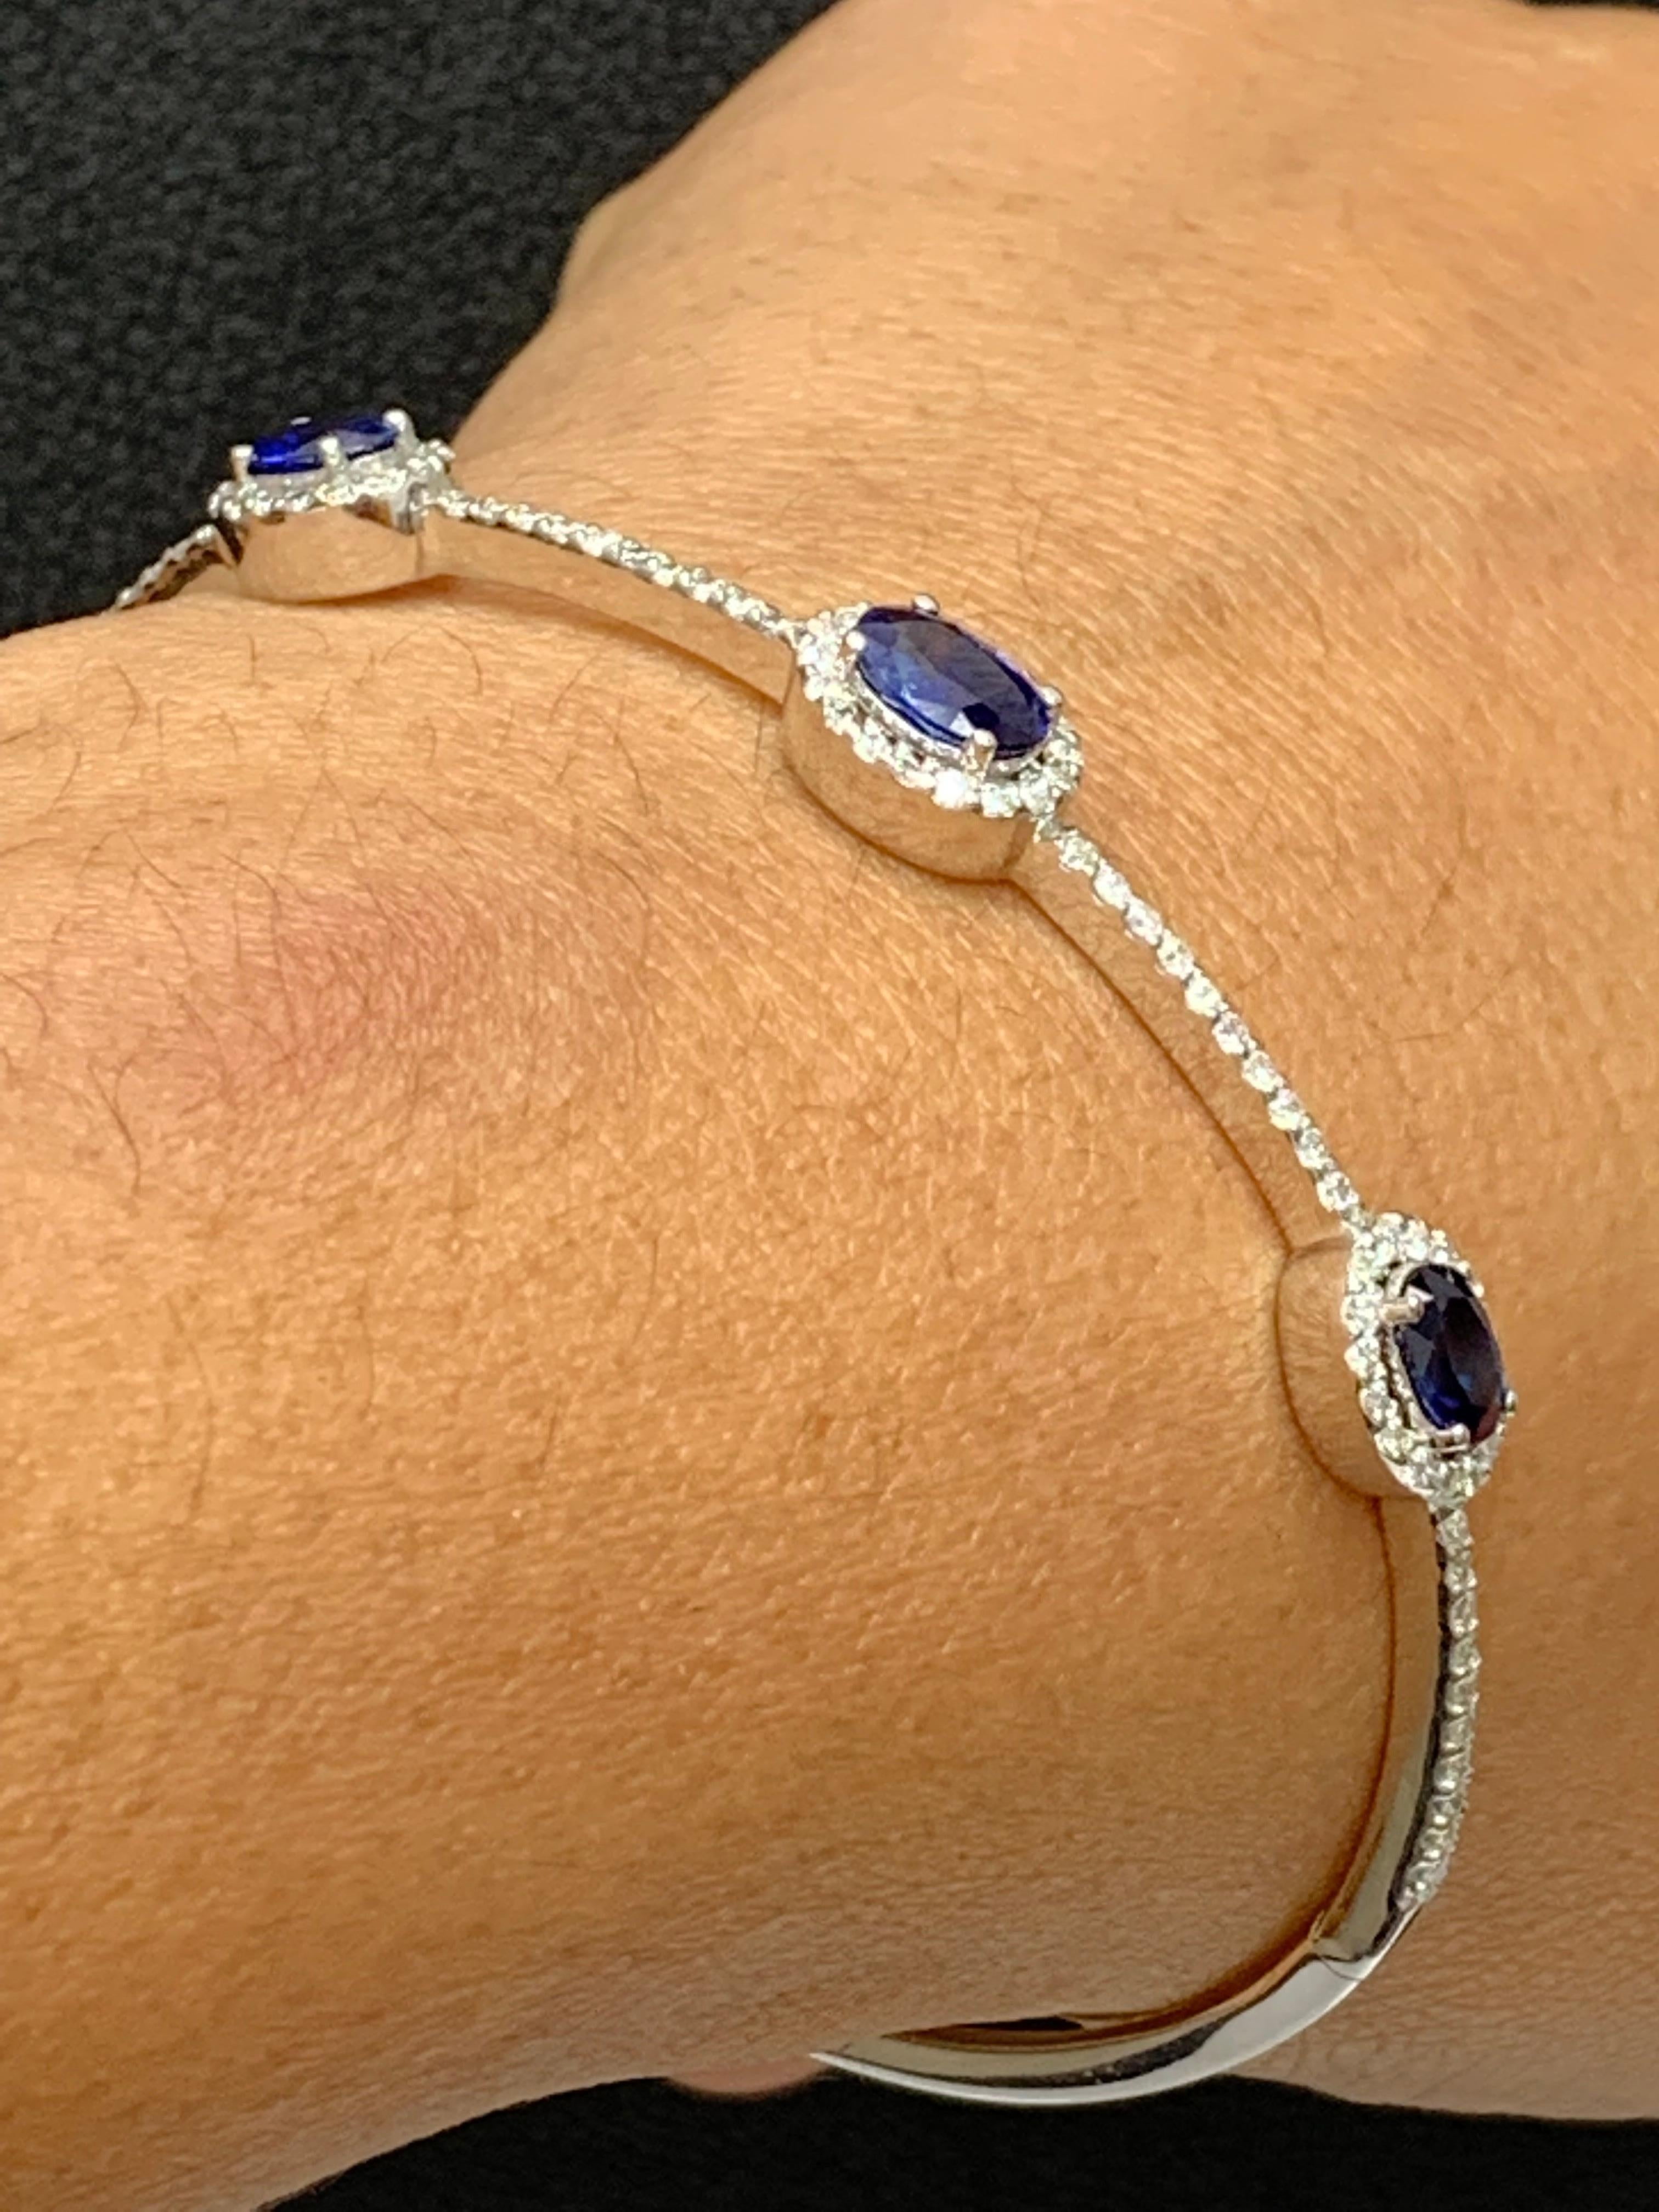 1.80 Carat Oval Cut Sapphire and Diamond Bangle Bracelet in 14K White Gold For Sale 4